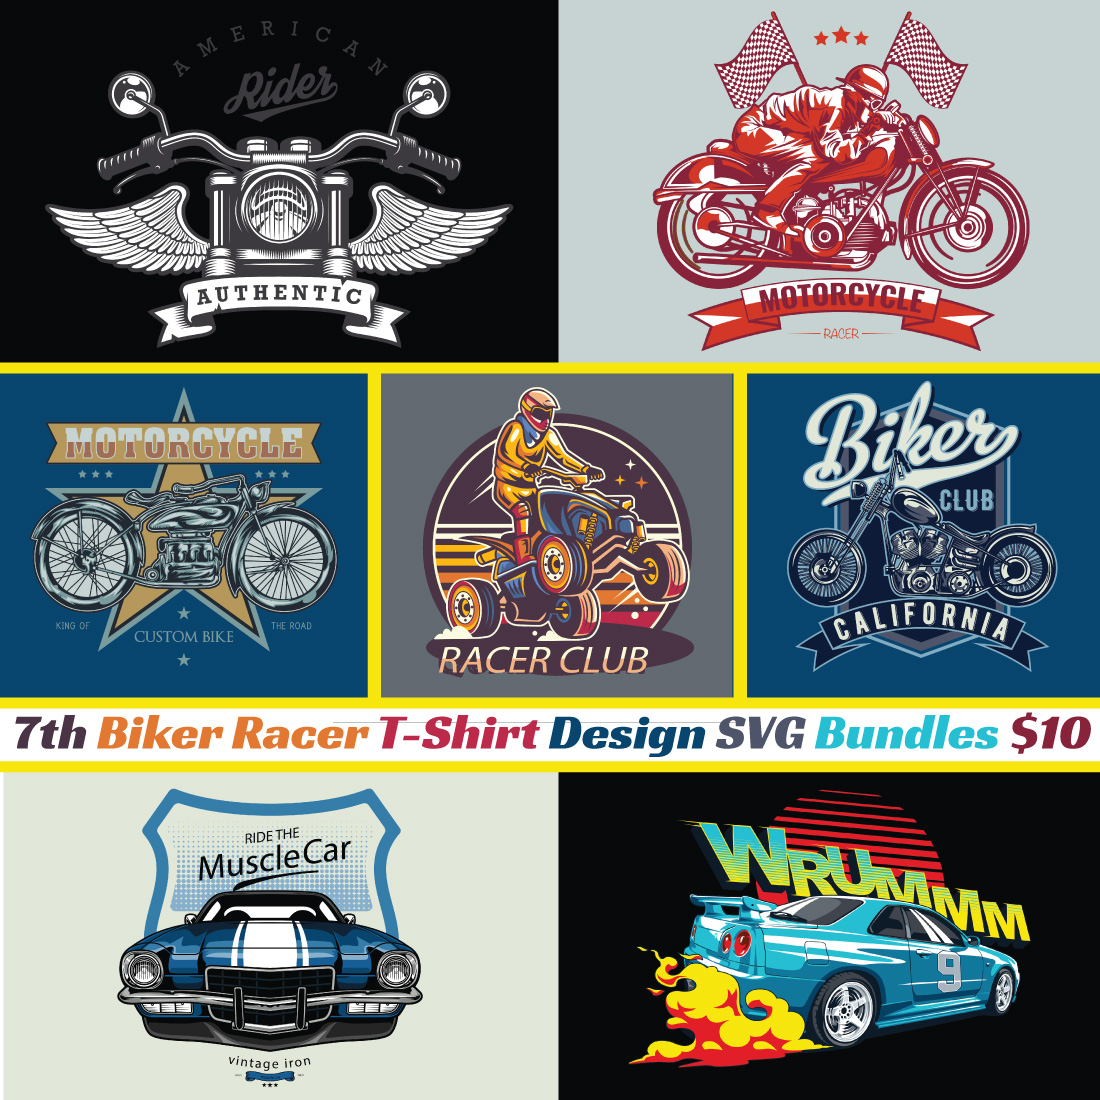 Motorcycle Racer Club T-shirt Design cover image.